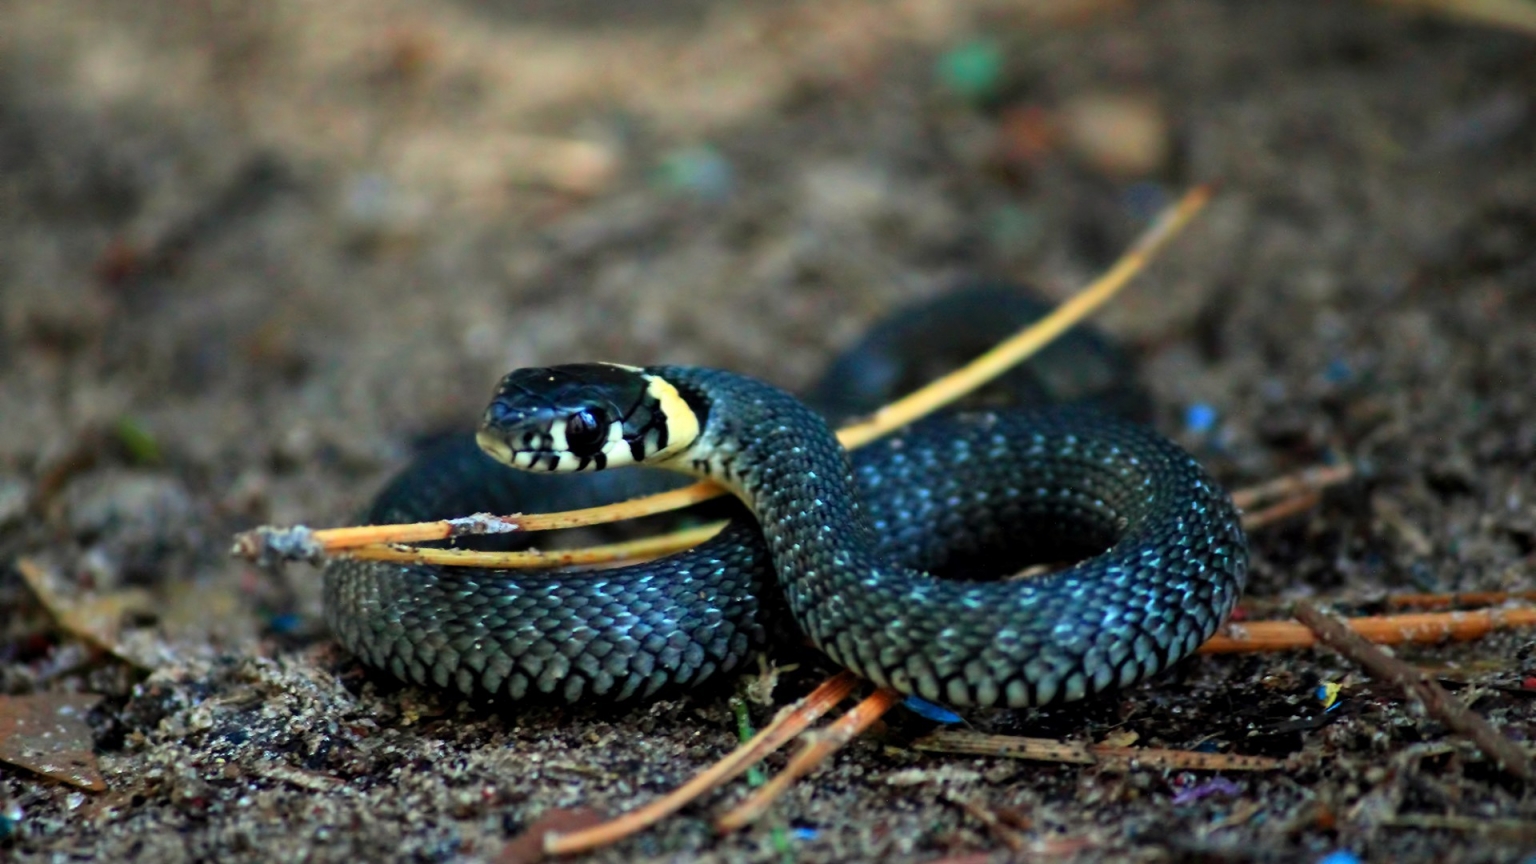 Curious Snake for 1536 x 864 HDTV resolution